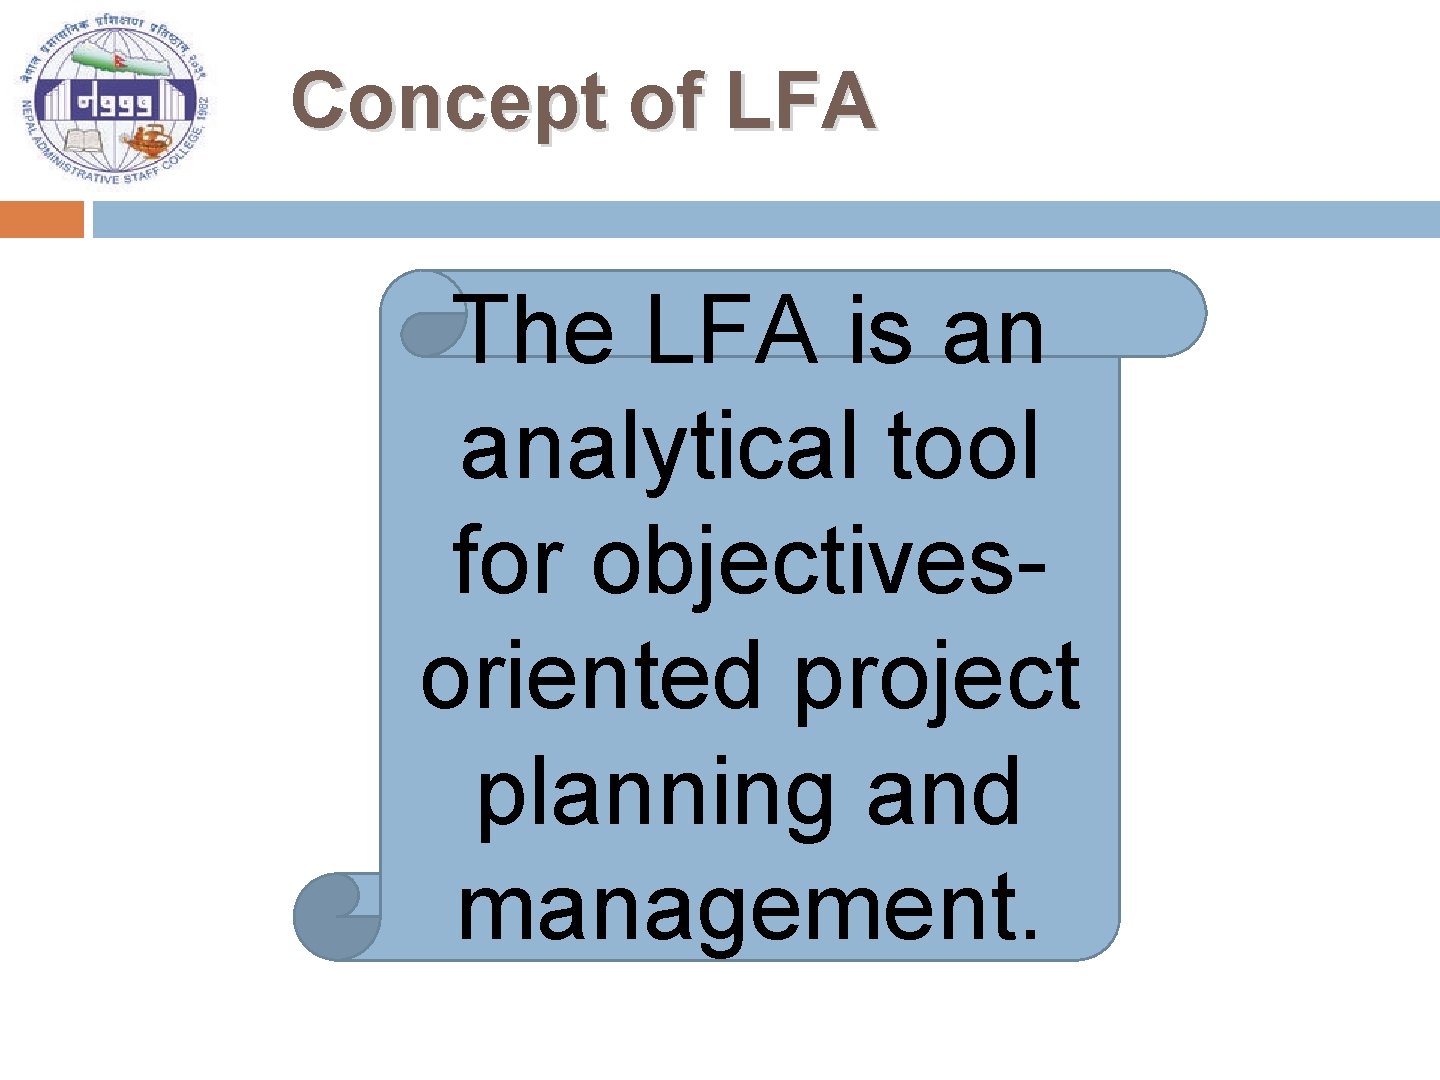 Concept of LFA The LFA is an analytical tool for objectivesoriented project planning and